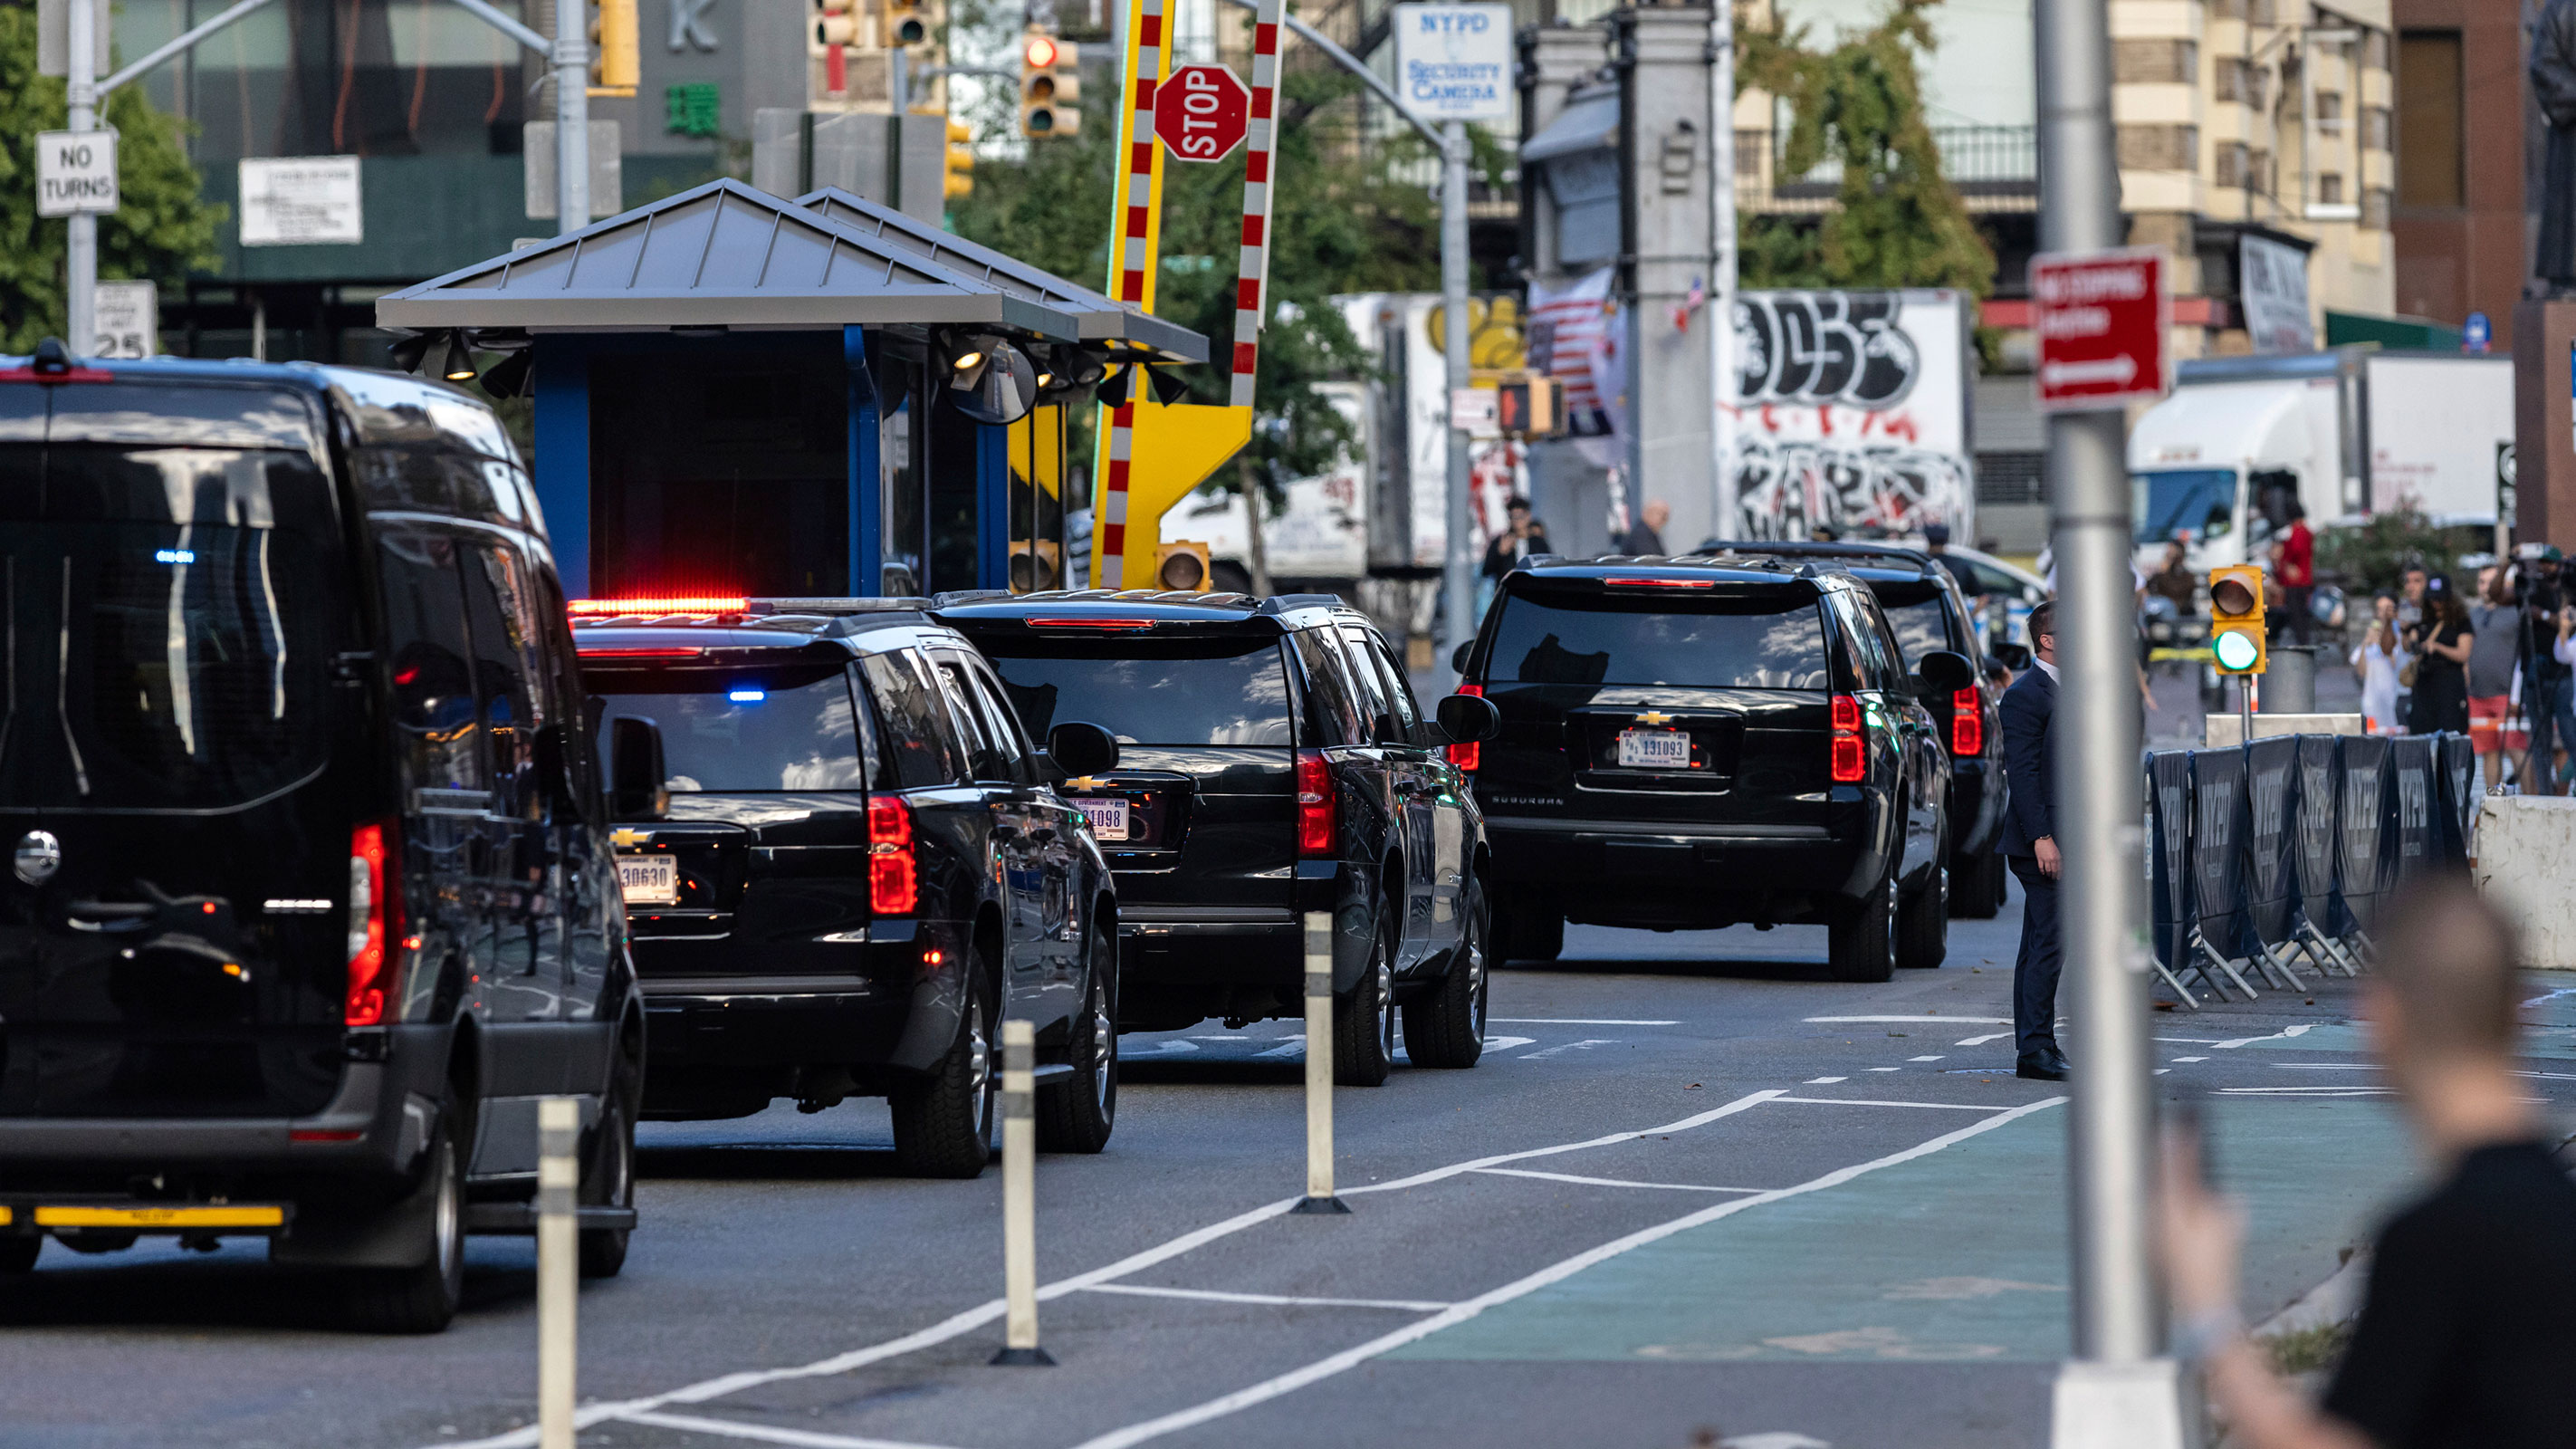 A motorcade carrying former President Donald Trump leaves the 60 Center St. New York State Supreme Courthouse in the Manhattan borough of New York on Monday.